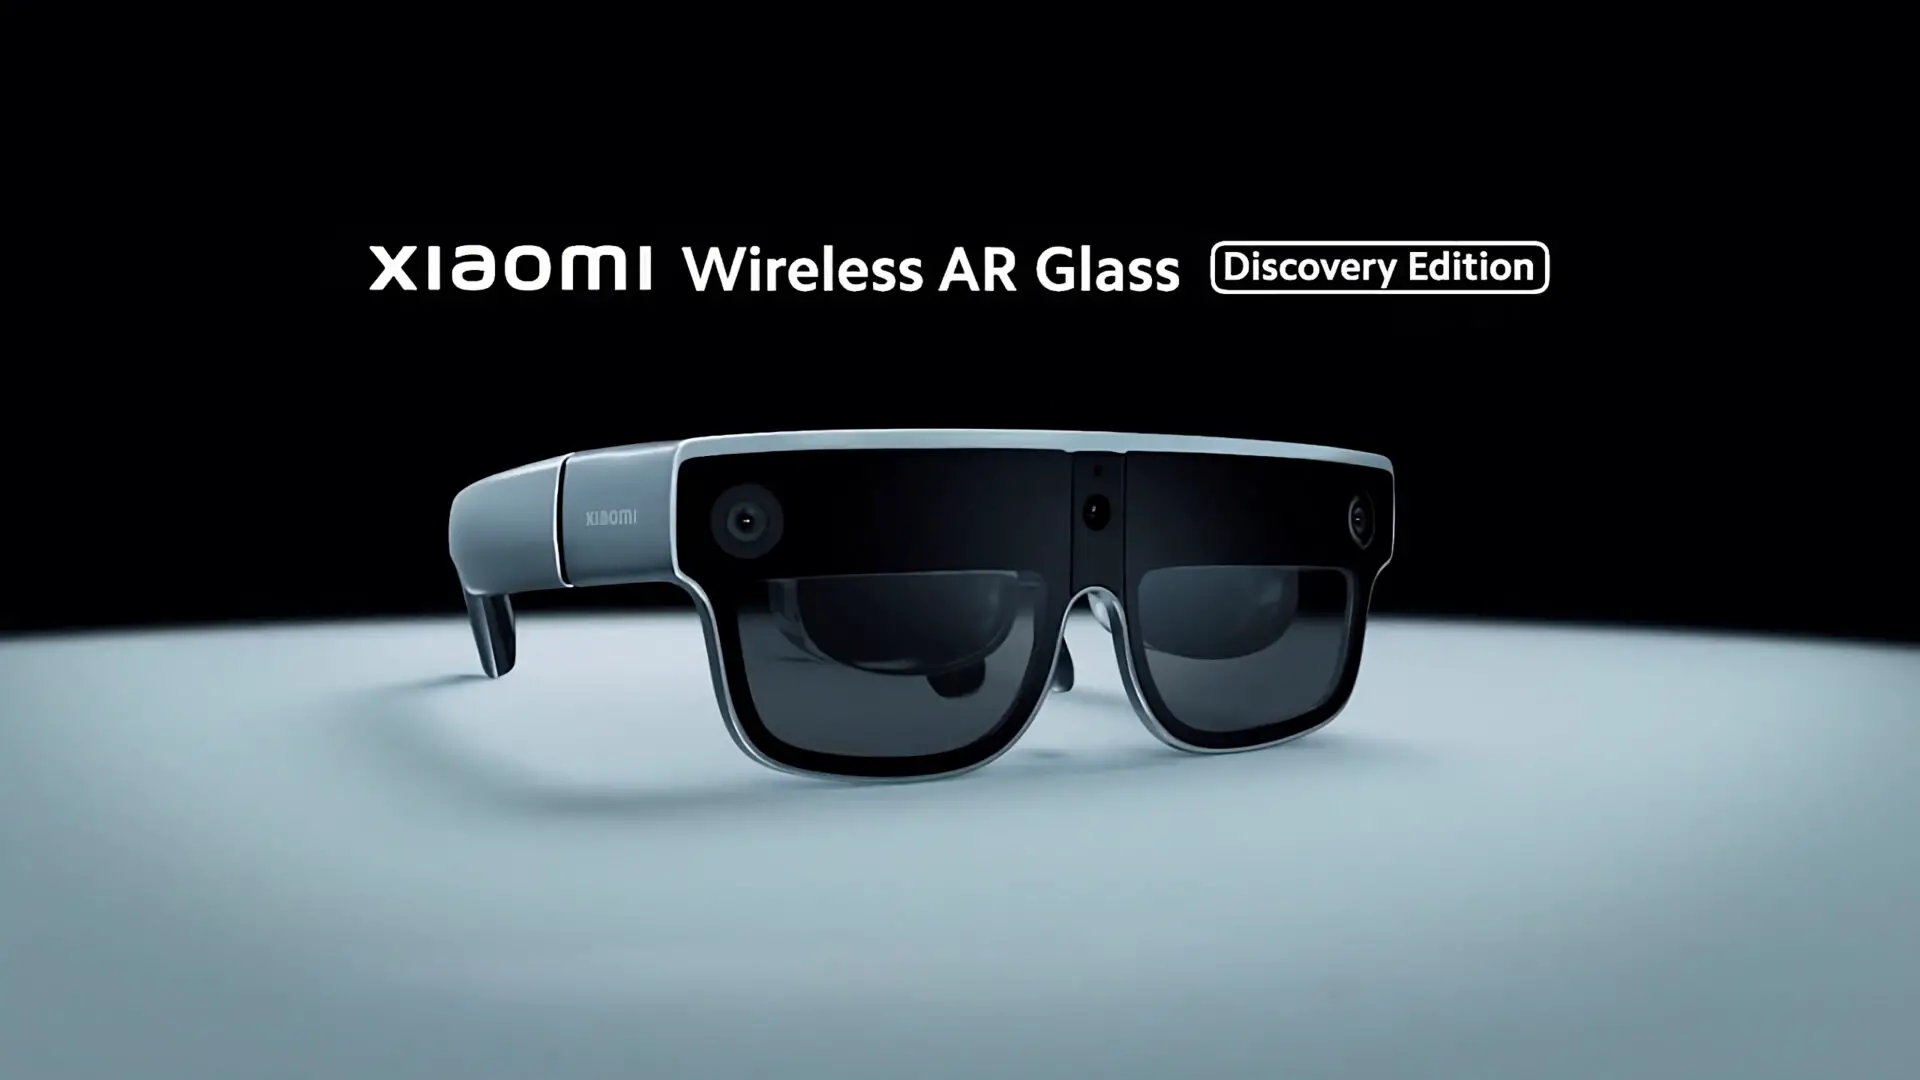 Xiaomi Wireless AR Glass Discovery Edition were introduced